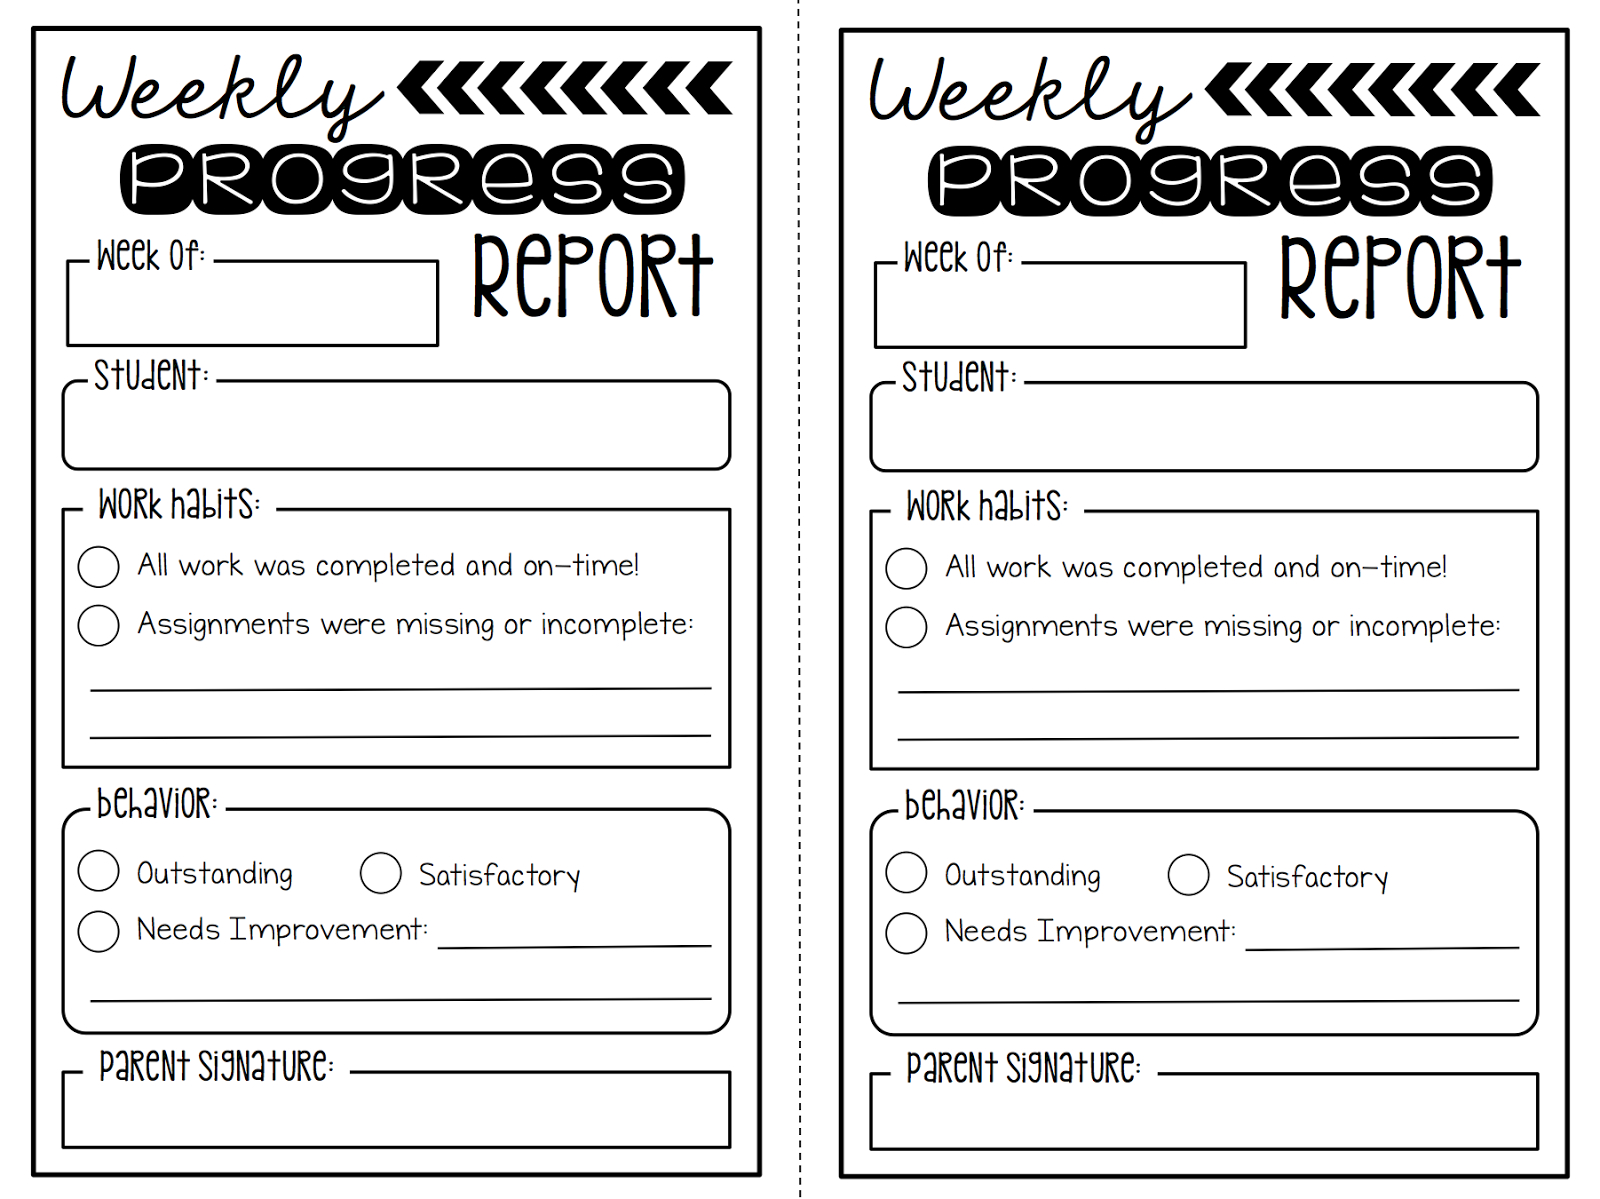 Weekly Behavior Report Template ] - Search Results For With Regard To Daily Behavior Report Template